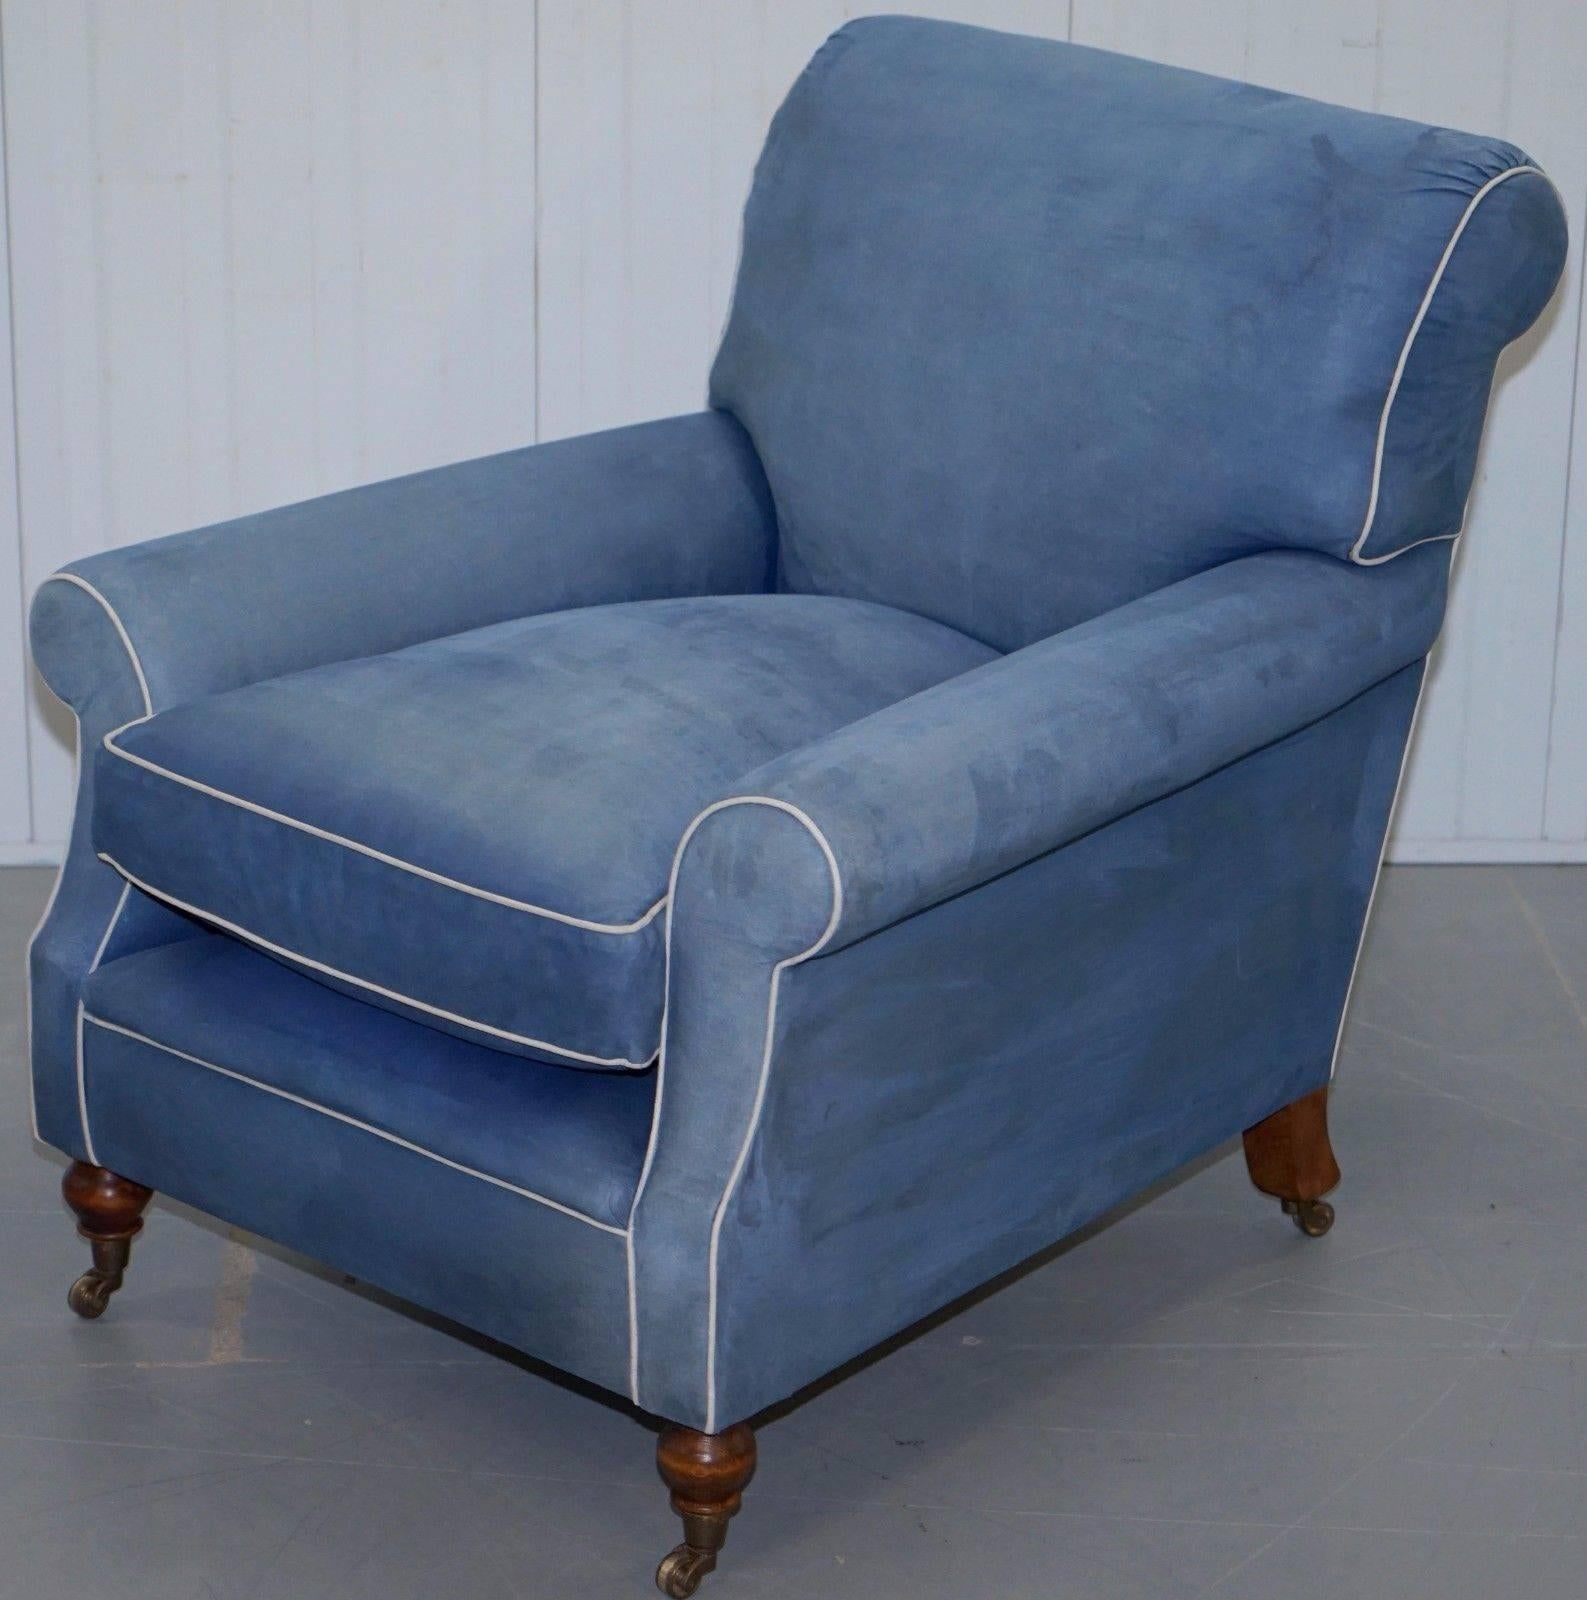 We are delighted to offer for sale this lovely George Smith laid back scroll arm signature armchair RRP £5470 and matching Run up ottoman RRP £2680 in blue suede leather 

There is around 50-100 high definition super-sized pictures at the bottom